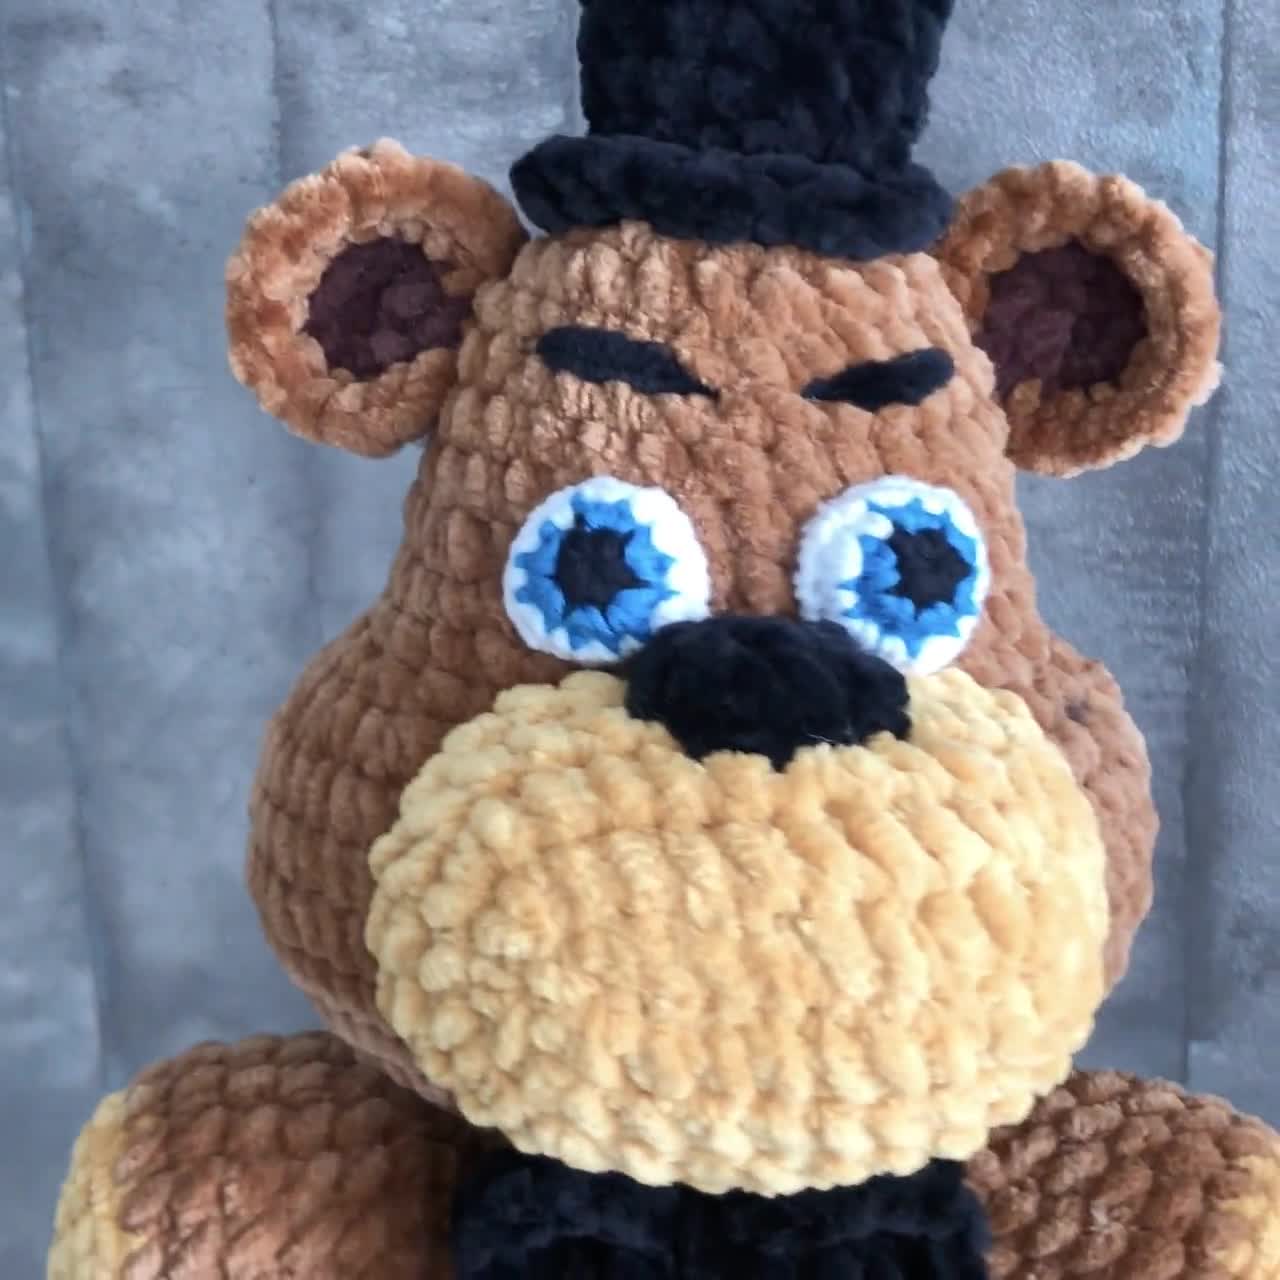 Peluche - Five Nights At Freddy's - Freddy With Tray